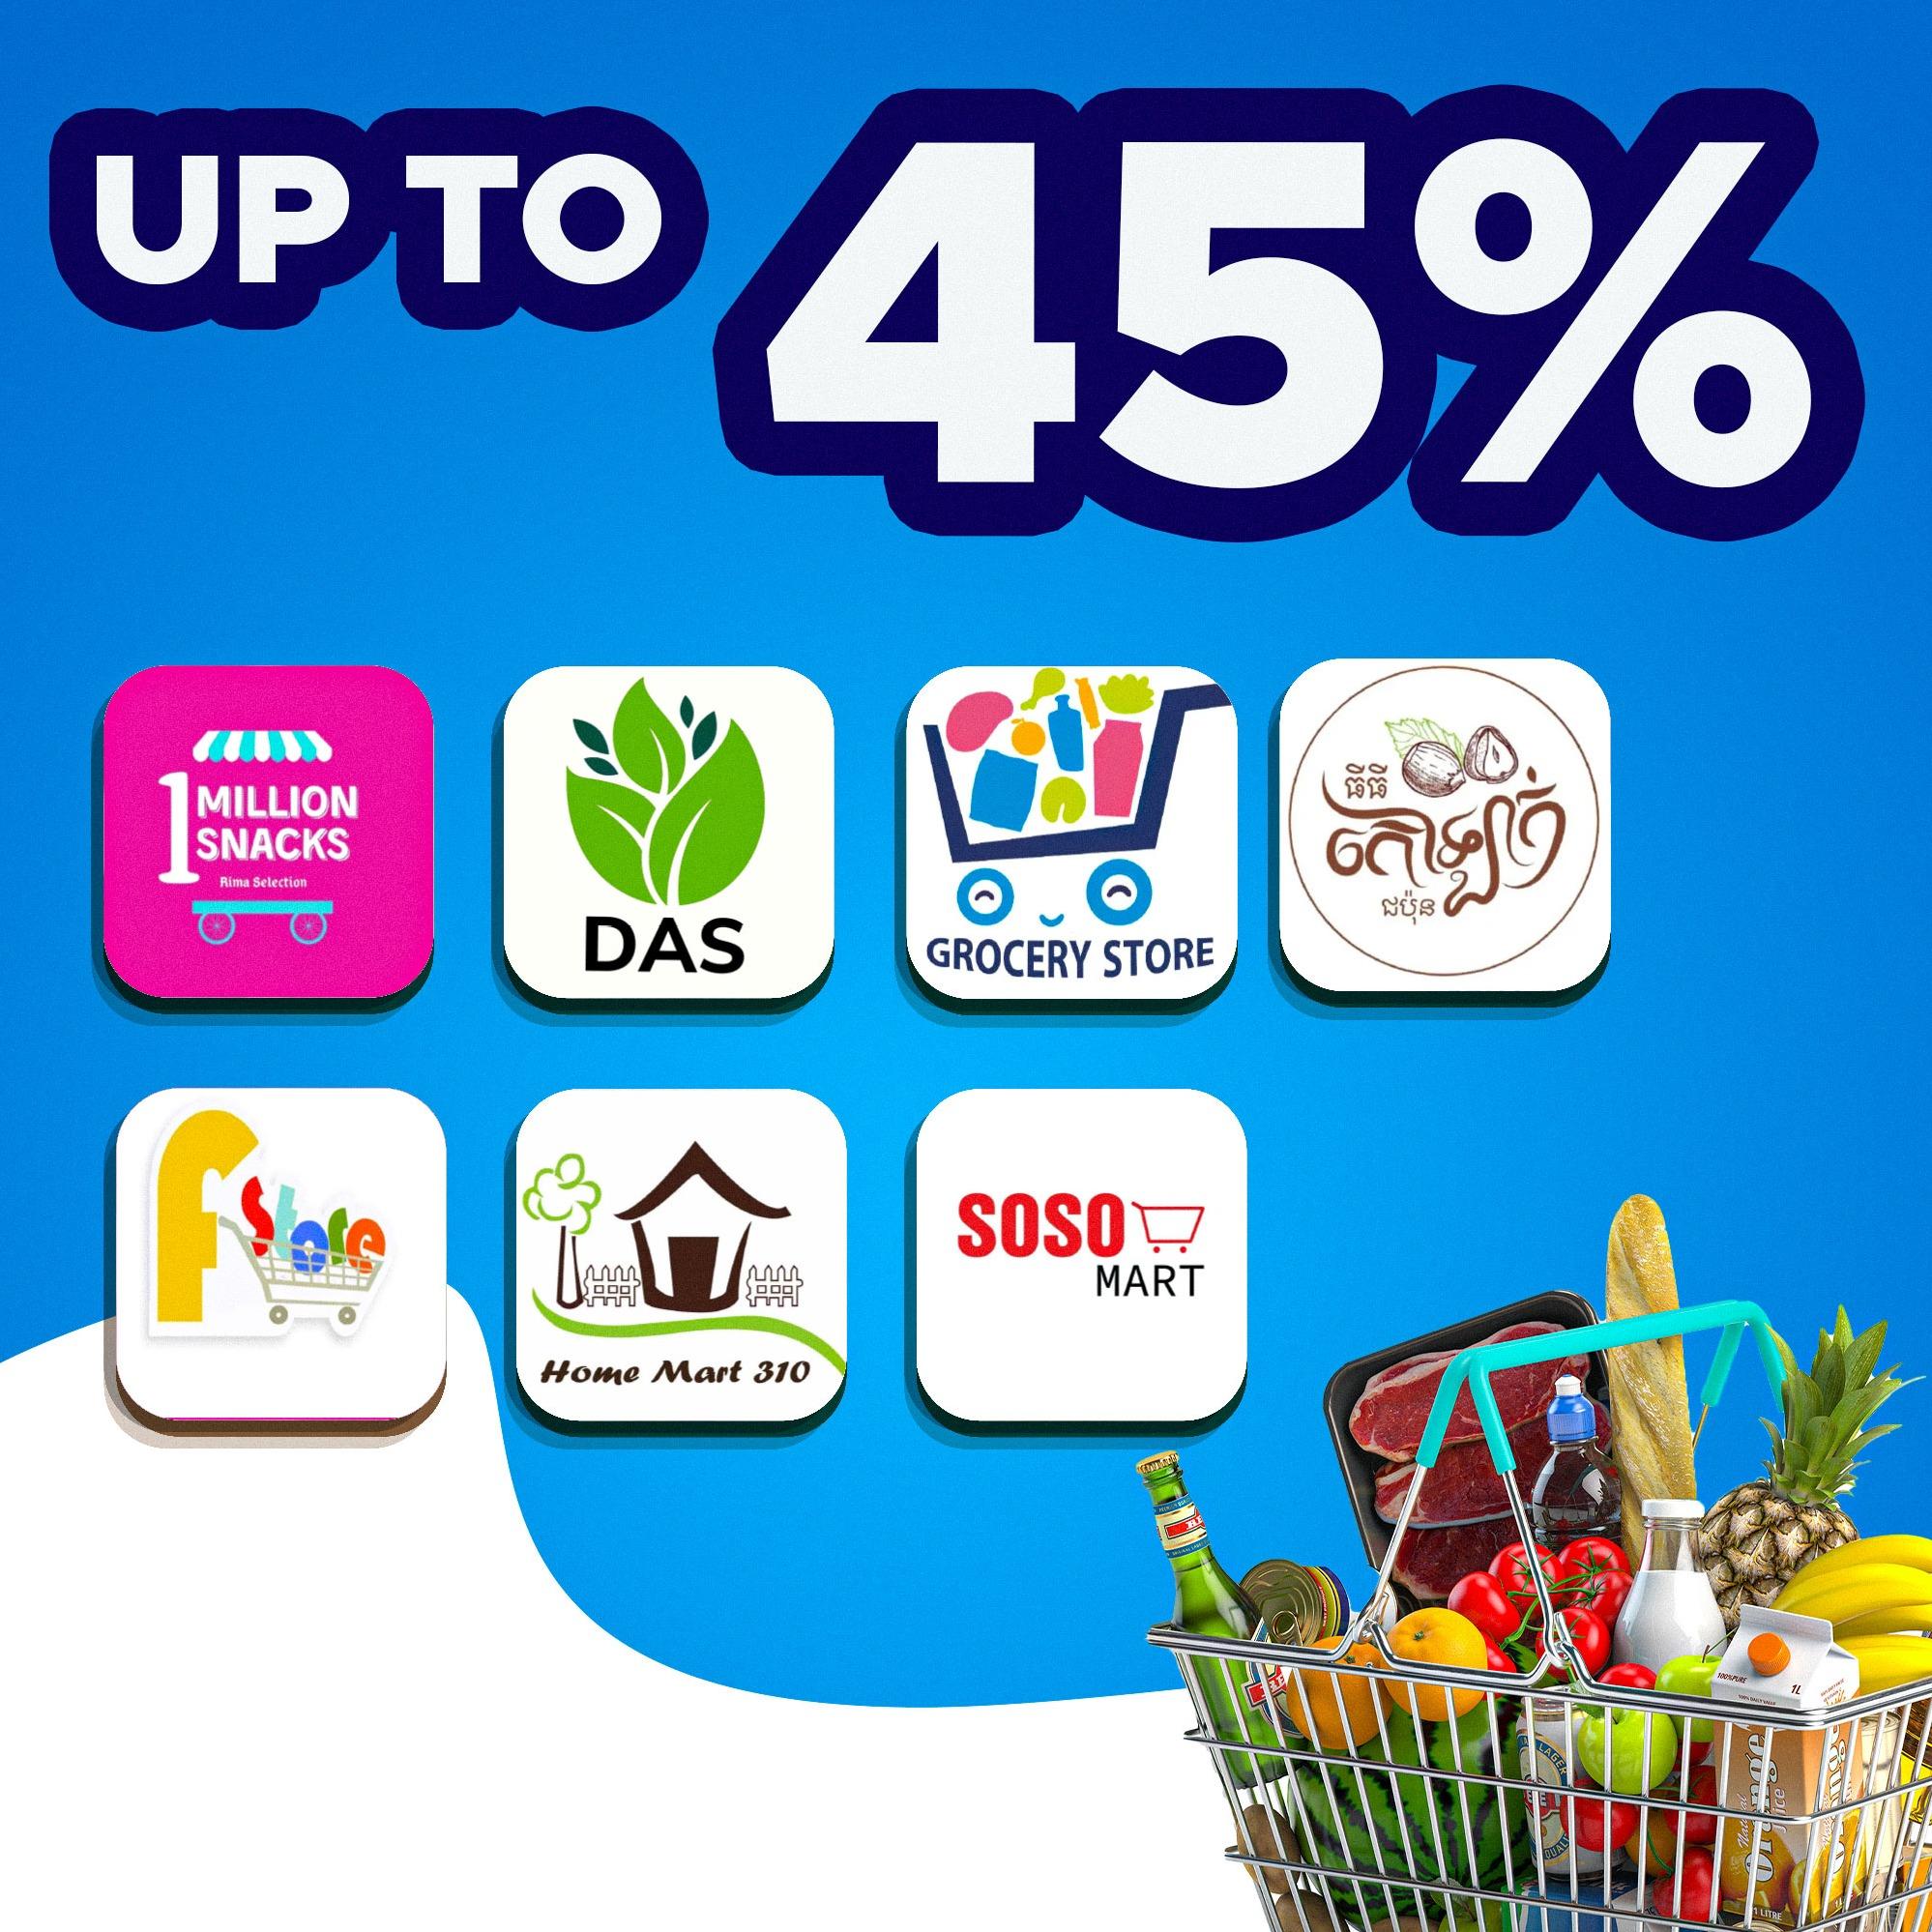 Supermarket Discount Up to 45%OFF